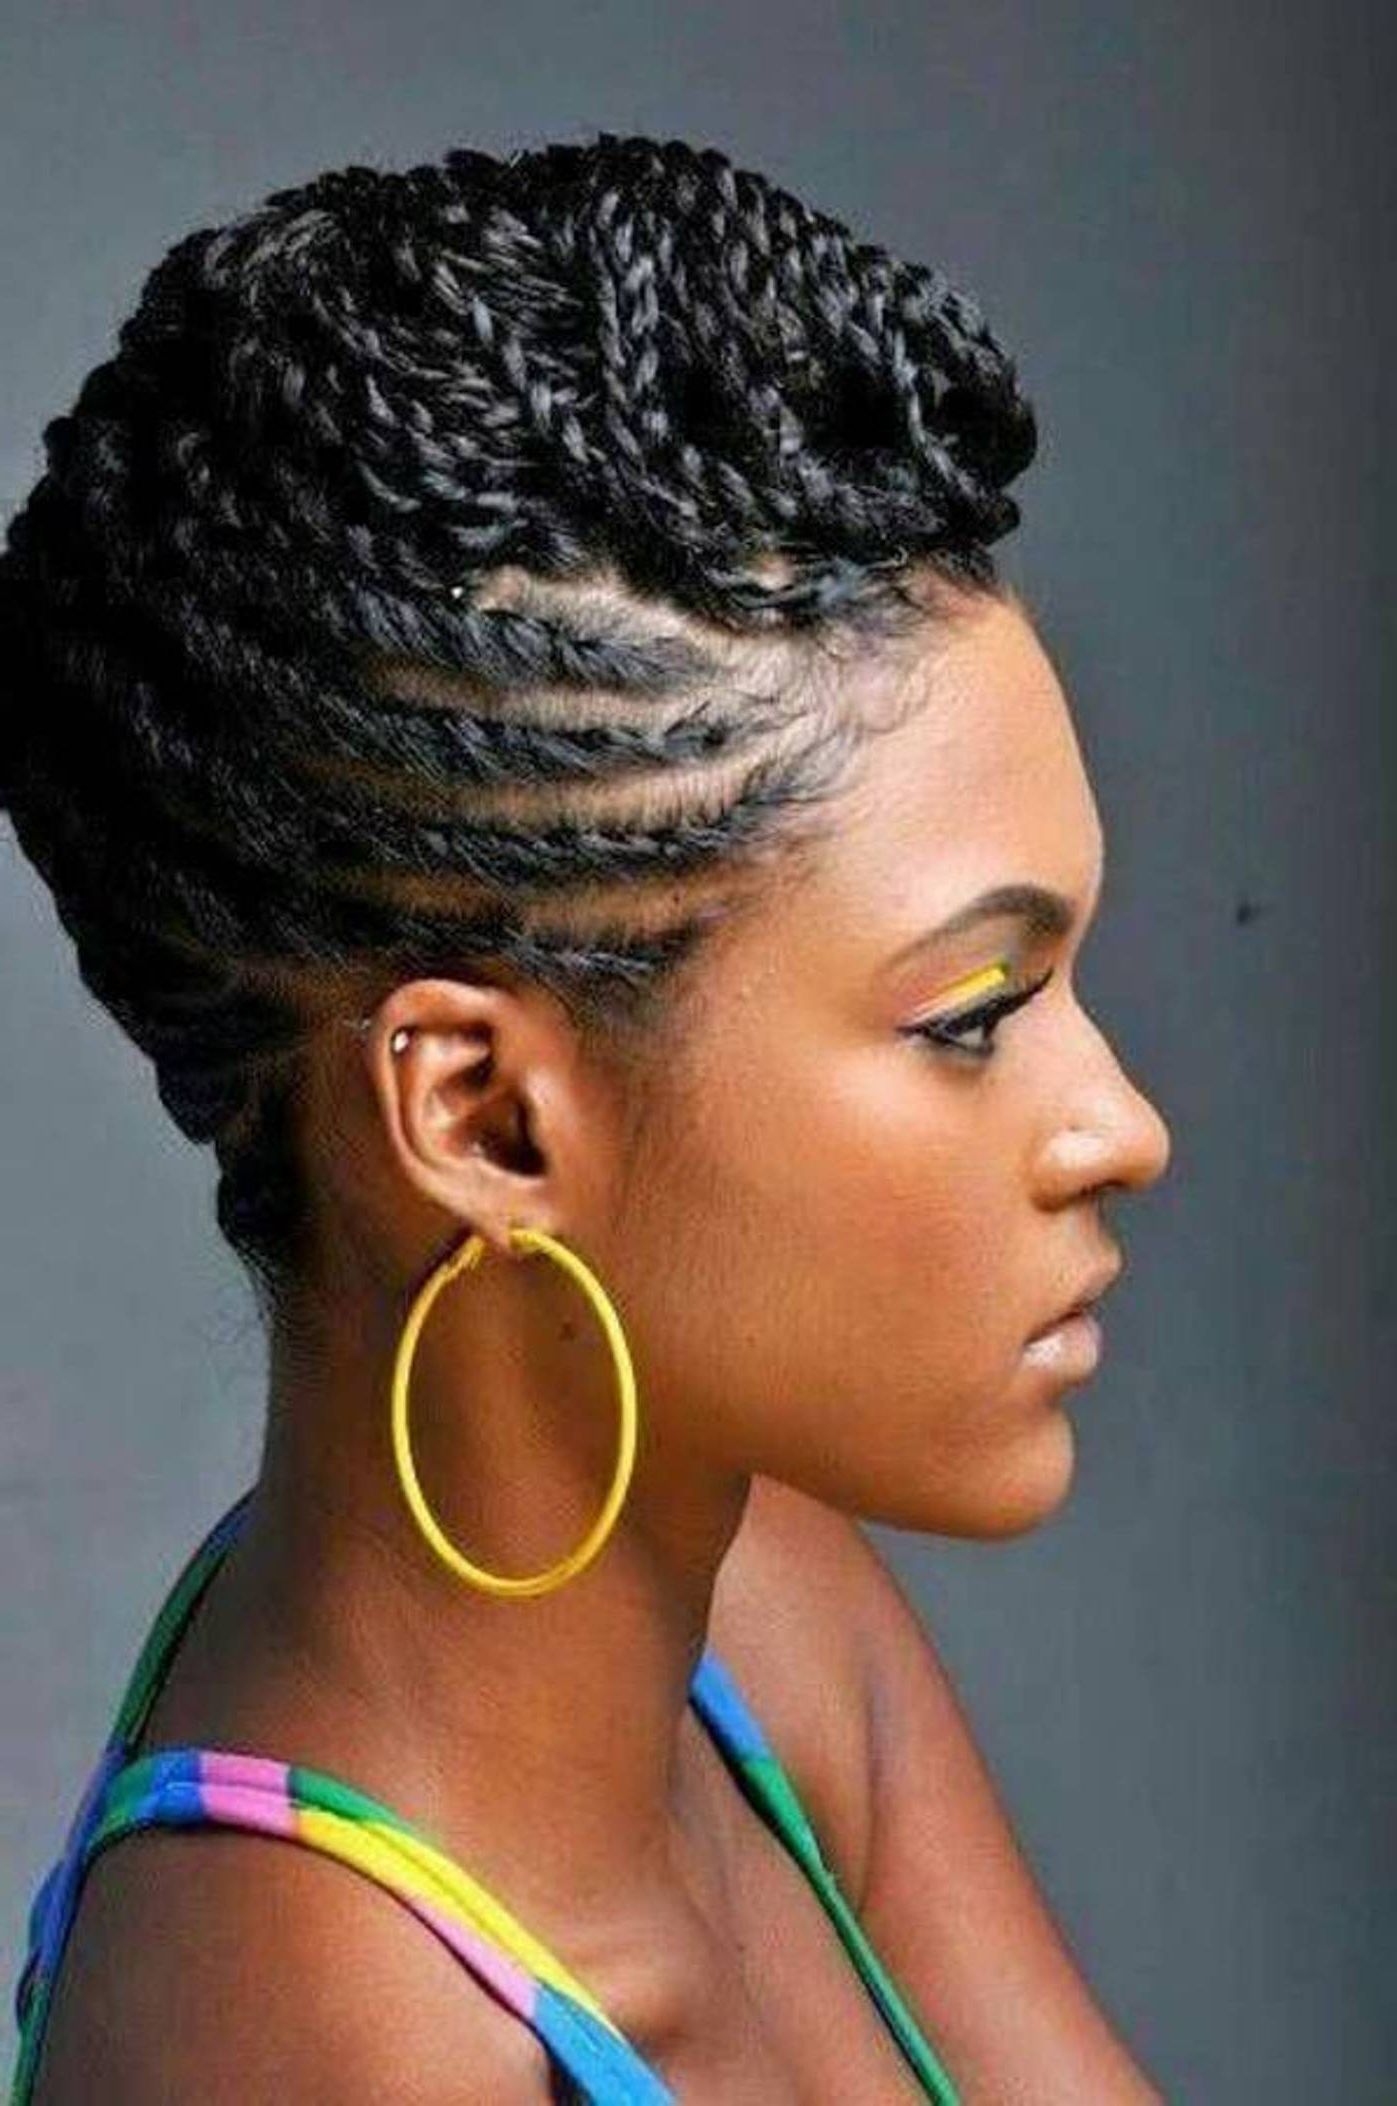 25 Updo Hairstyles For Black Women | Black Updo Hairstyles Throughout Shorter Black Messy Hairstyles (View 9 of 25)